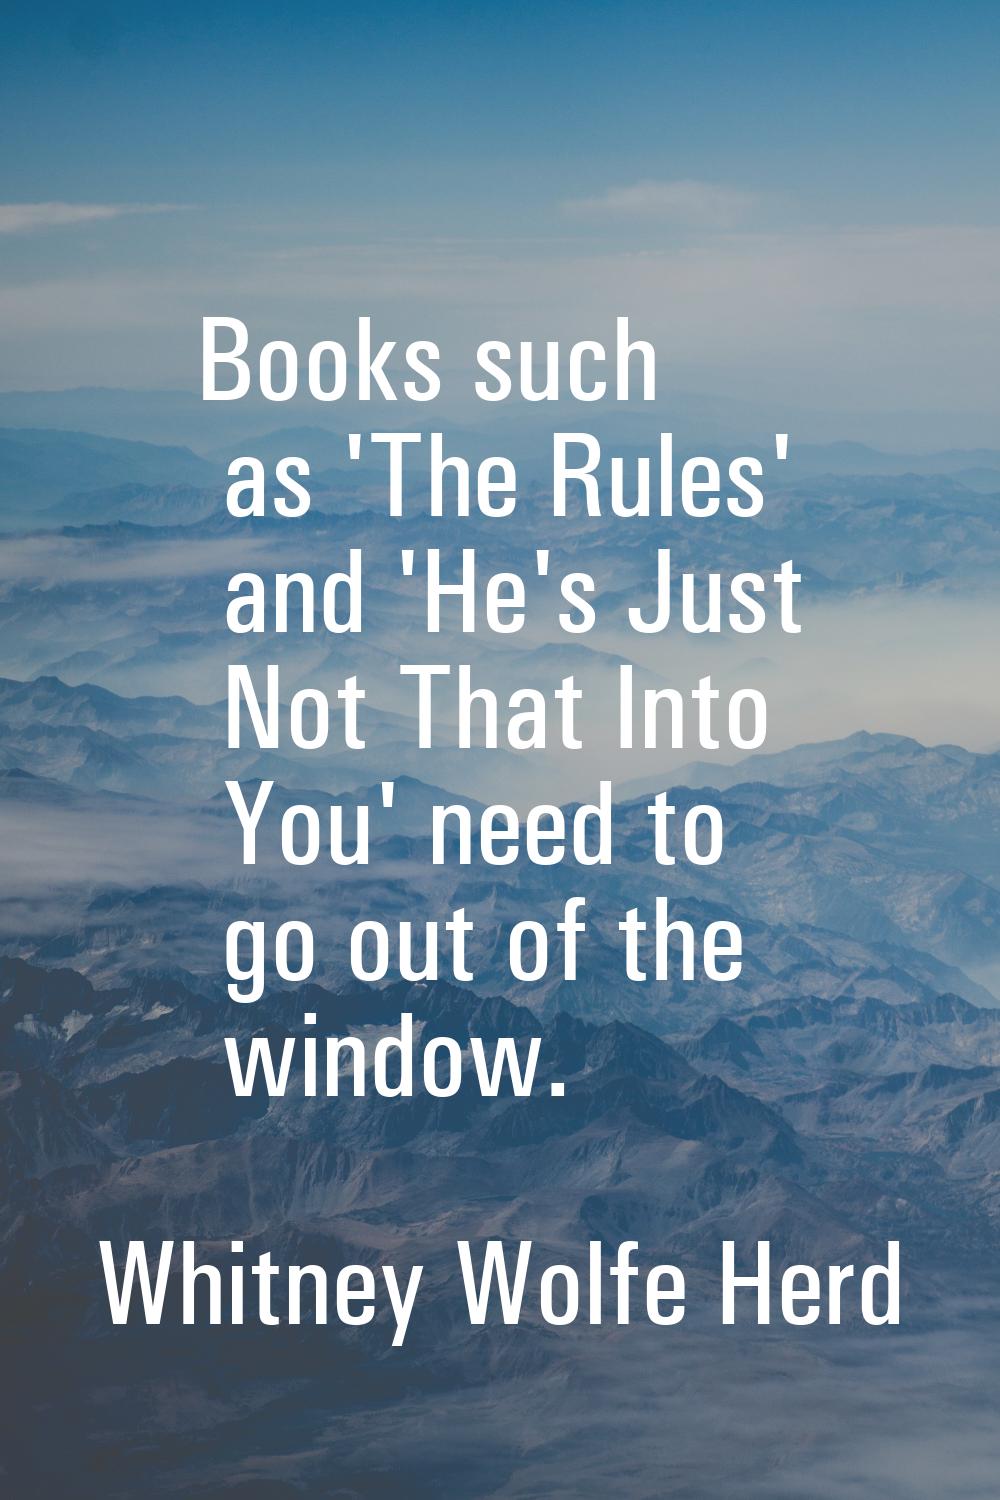 Books such as 'The Rules' and 'He's Just Not That Into You' need to go out of the window.